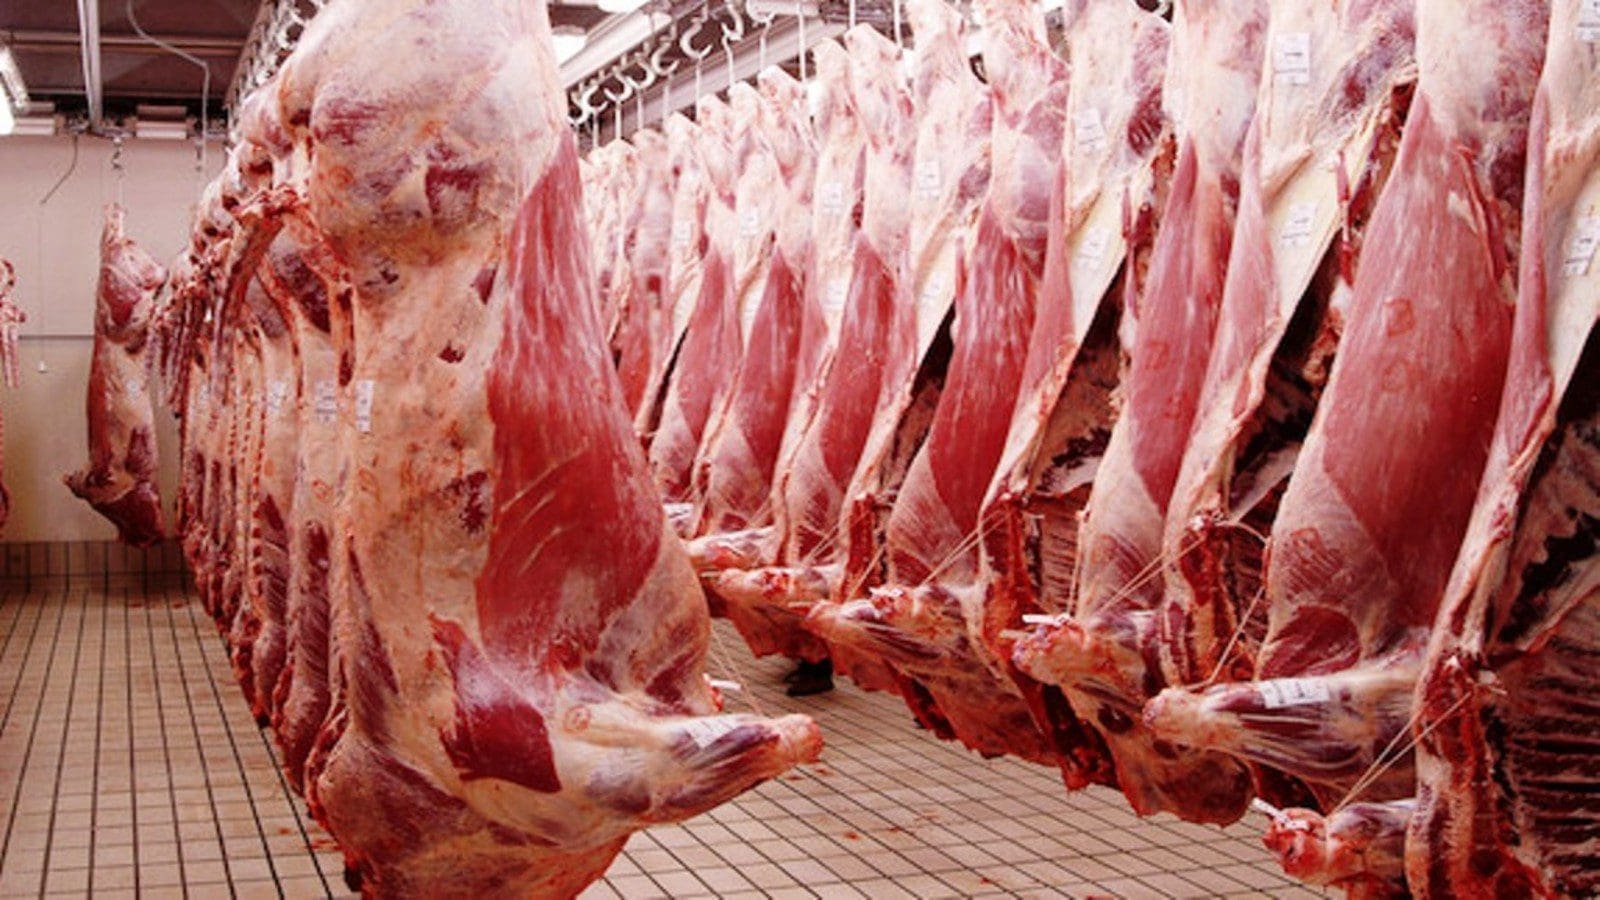 Tanzania meat processing centers assessed prior to exporting meat to Saudi Arabia